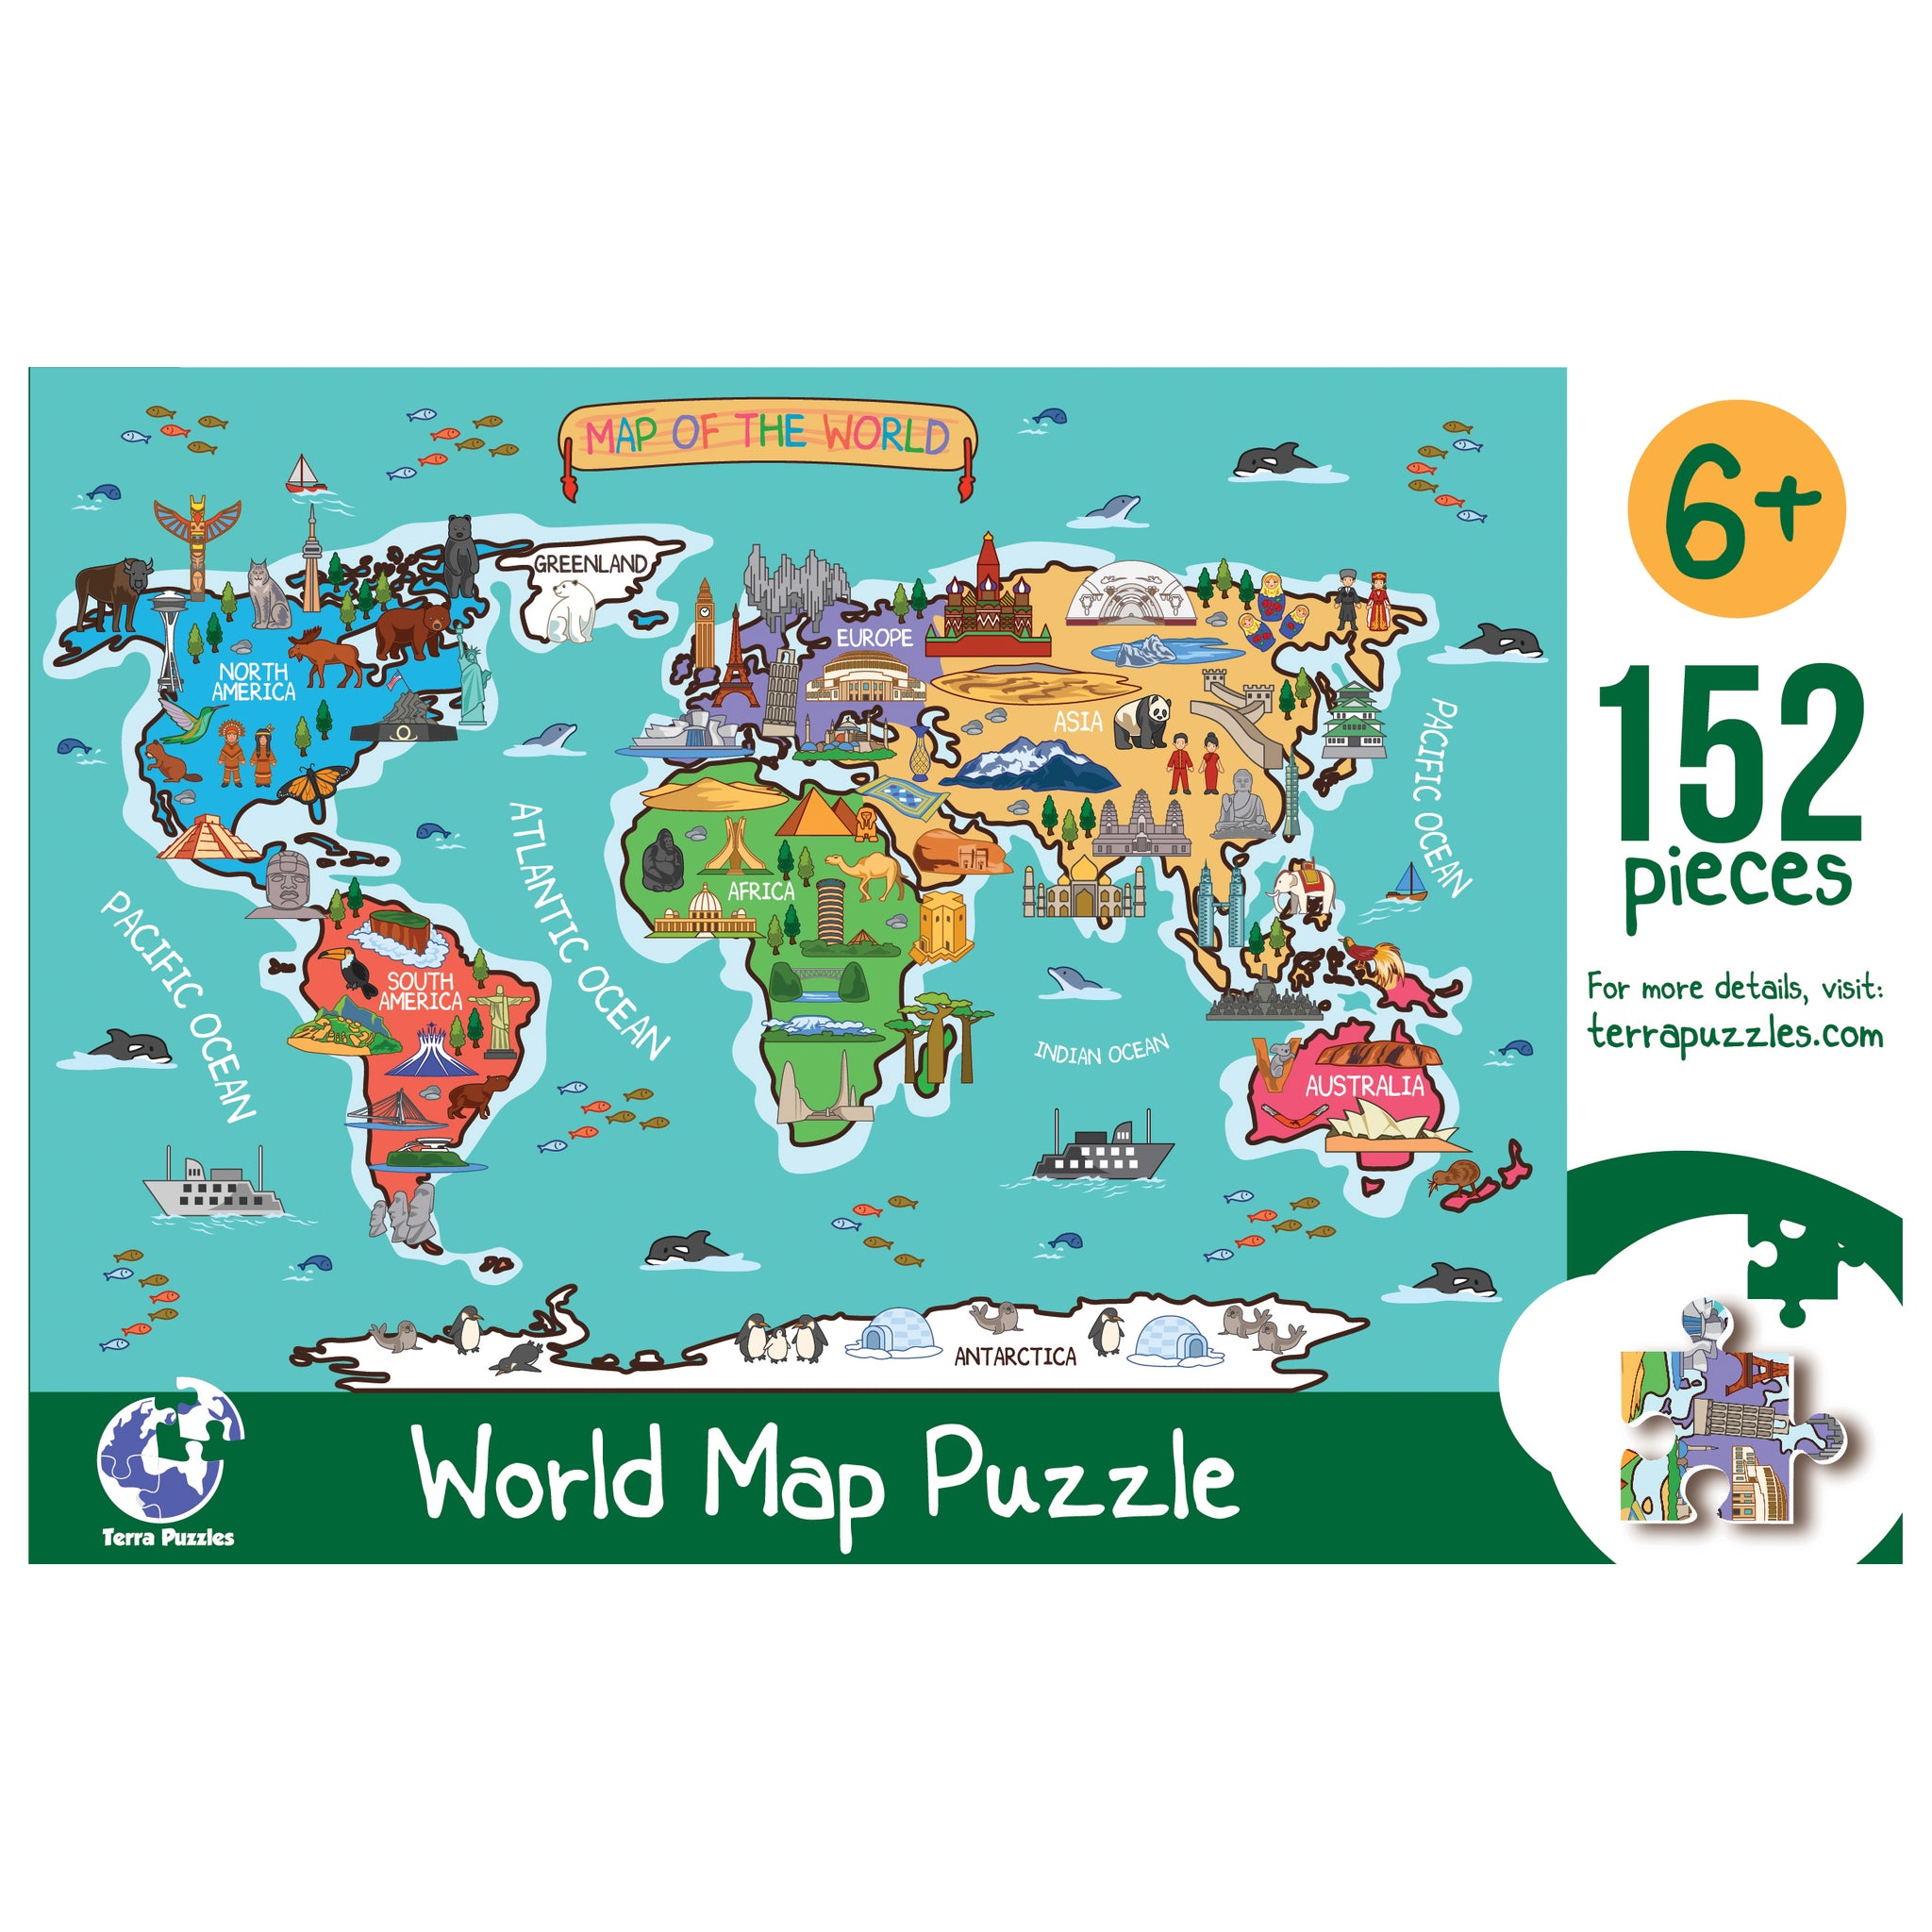 The World Map Wooden Jigsaw Puzzle